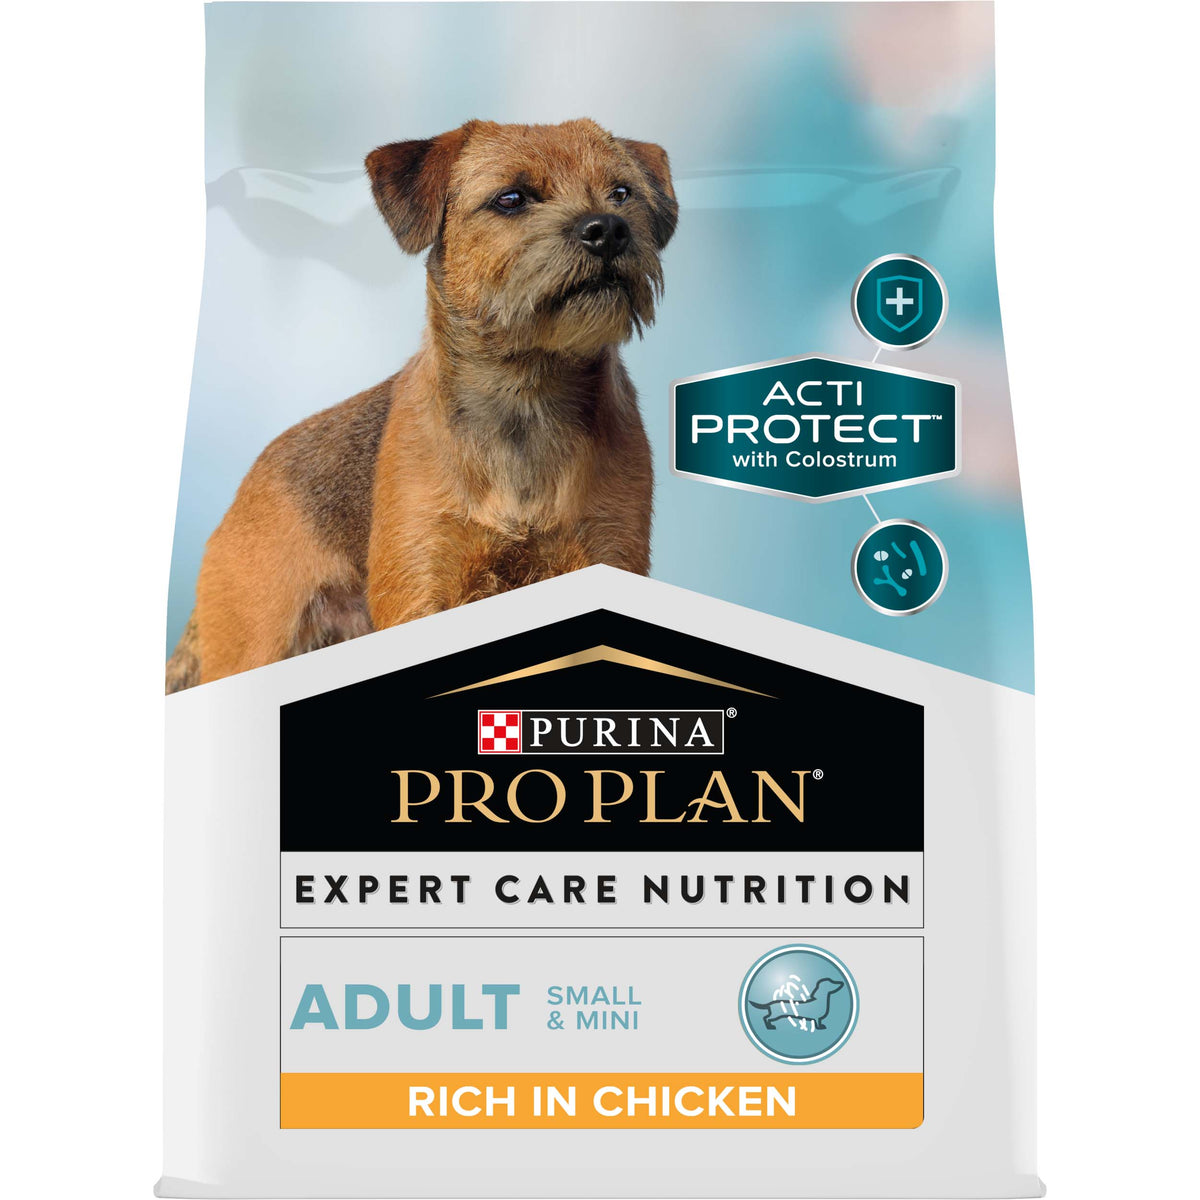 PURINA® PRO PLAN® Expert Care Nutrition - Canine Adult Small & Mini - Chicken 1.5kg